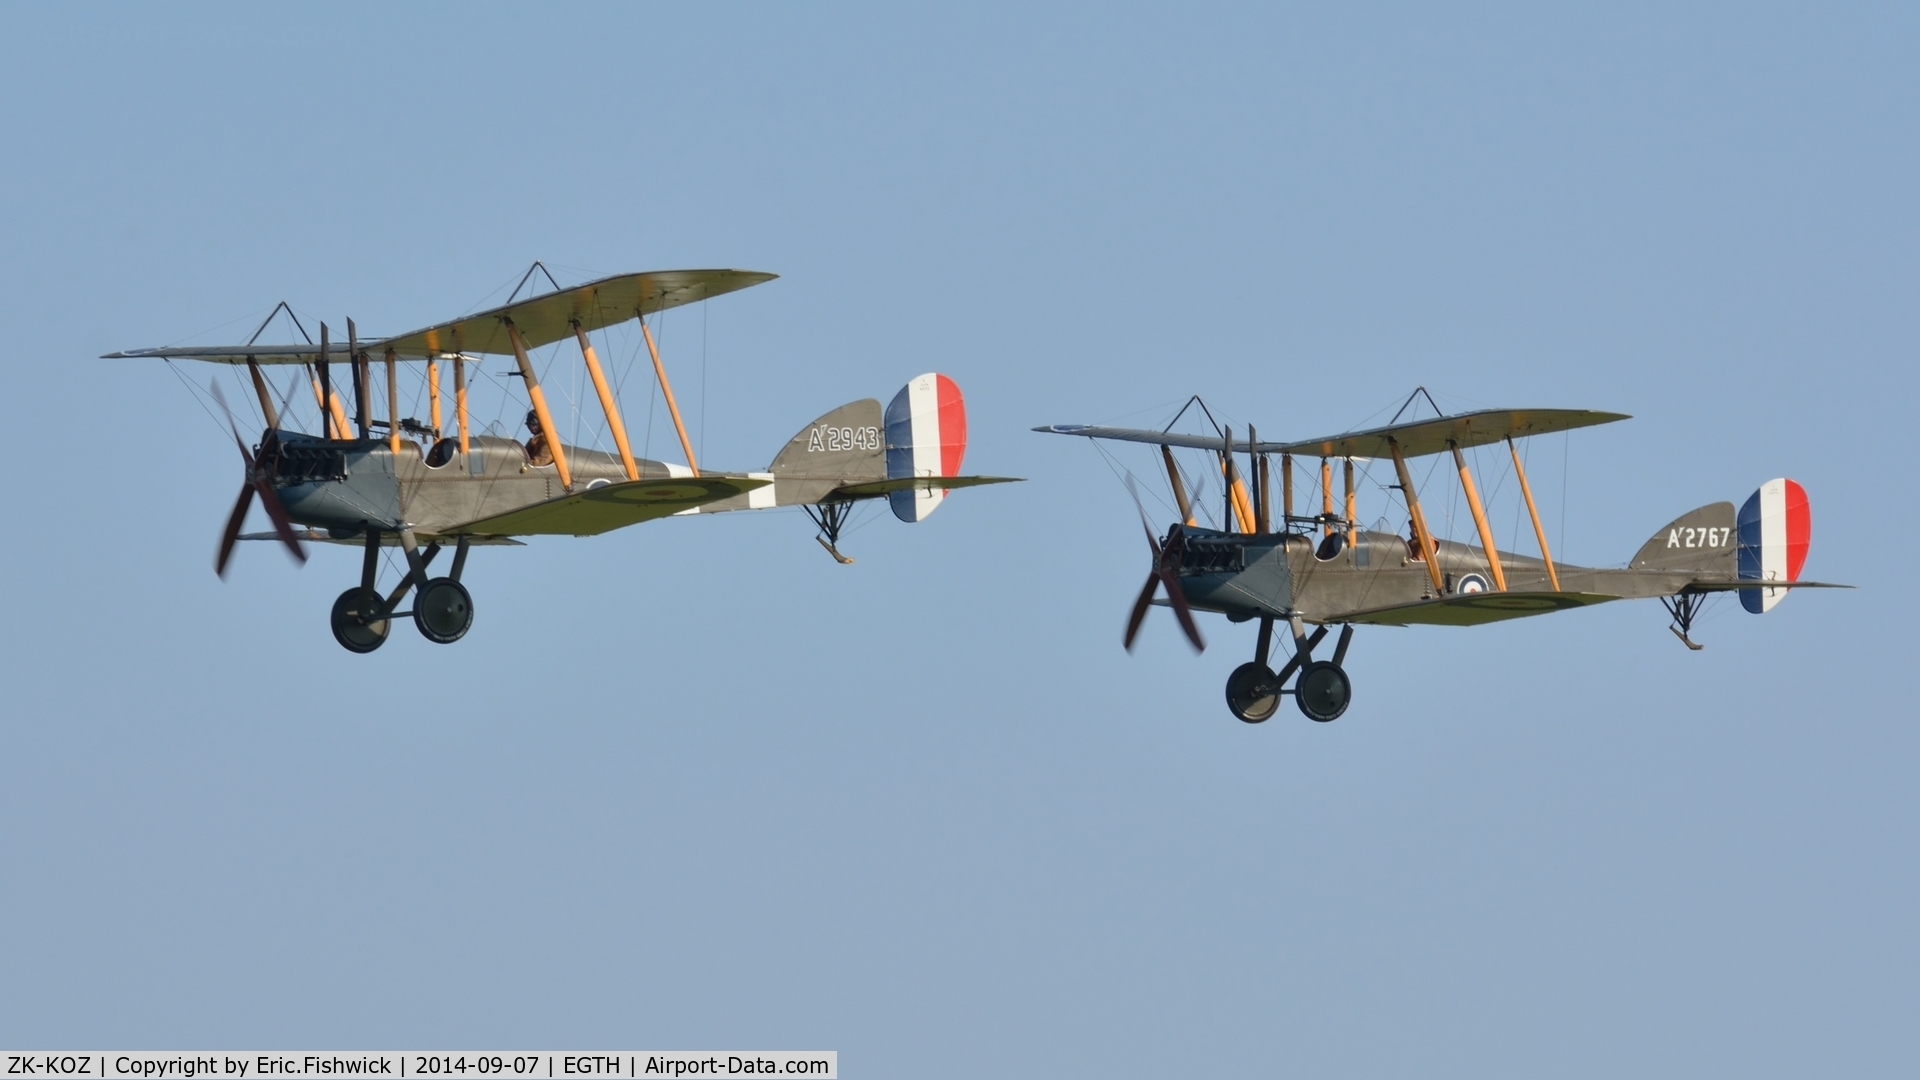 ZK-KOZ, 2014 Royal Aircraft Factory BE-2e Replica C/N 752, 45. K'2767 and A'2943 at the glorious Shuttleworth Pagent Airshow, Sep. 2014.